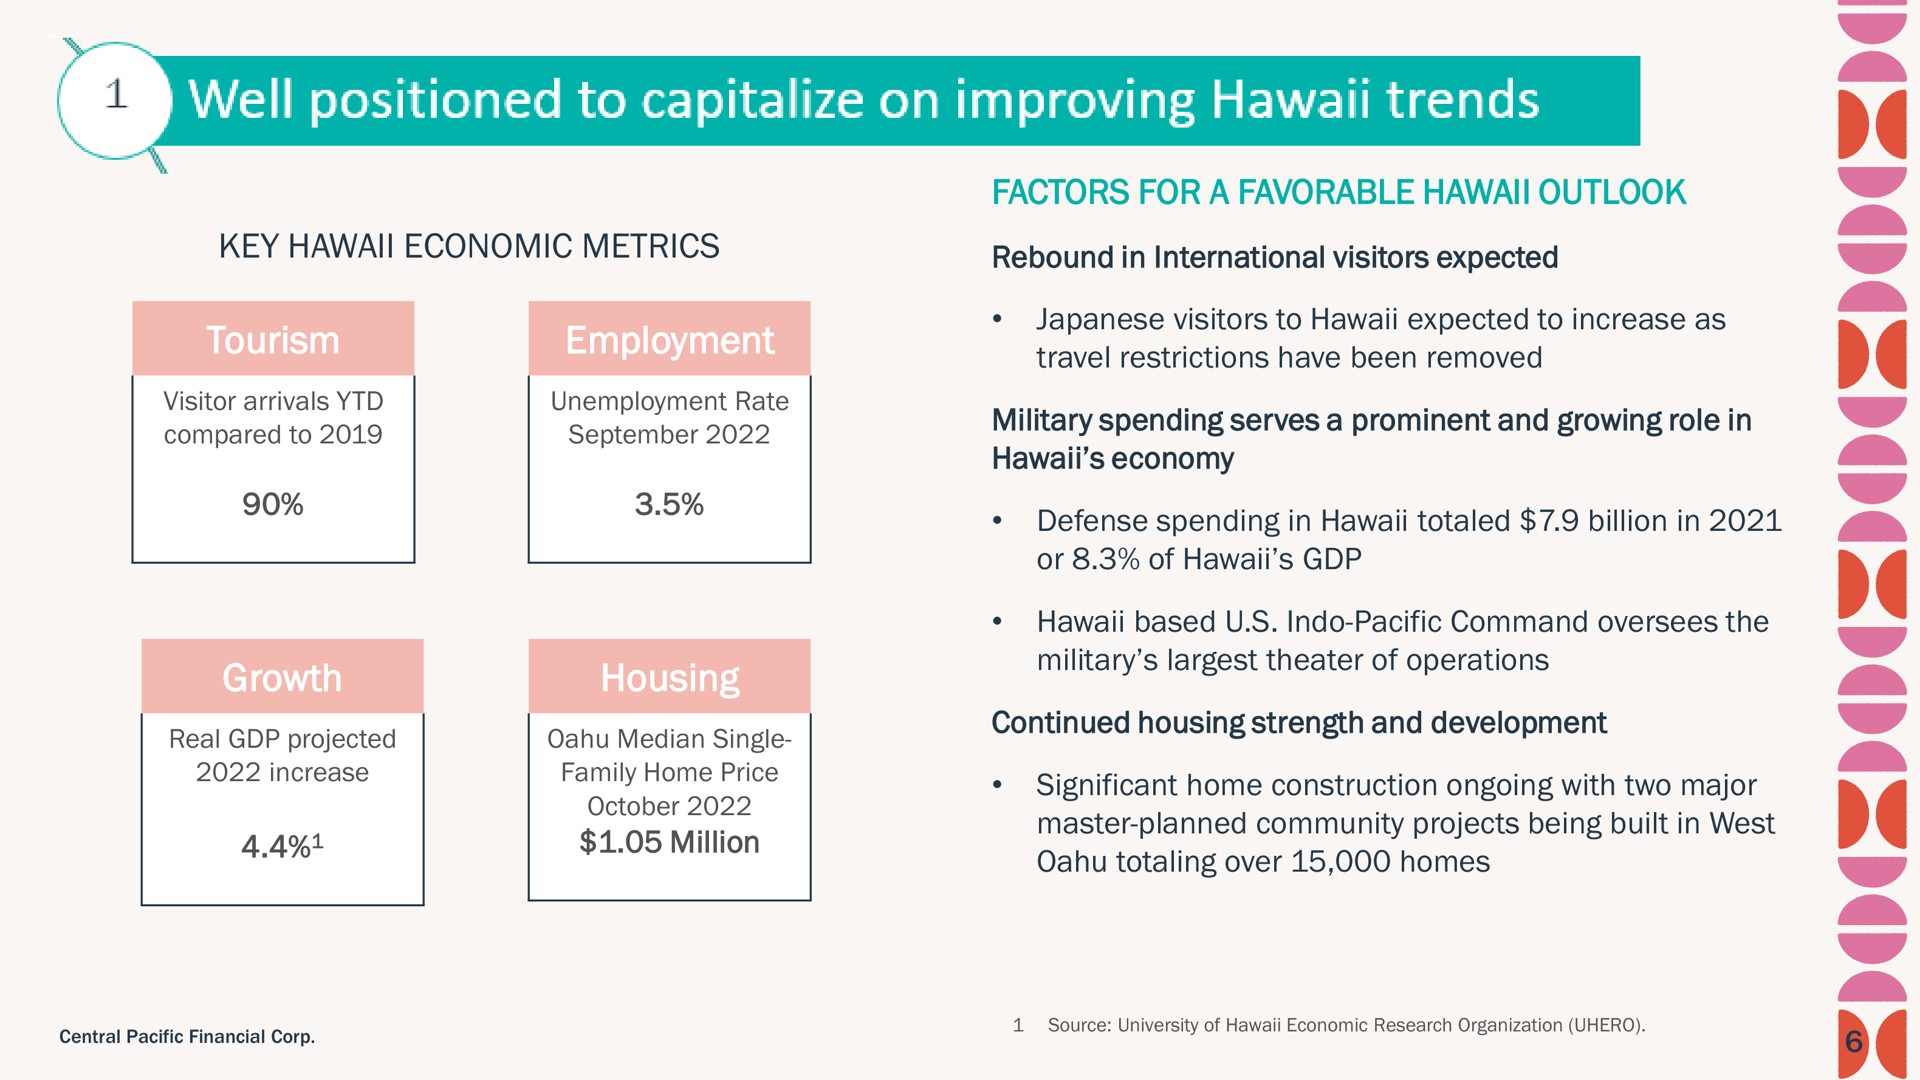 well positioned to capitalize on improving trends | Central Pacific Financial